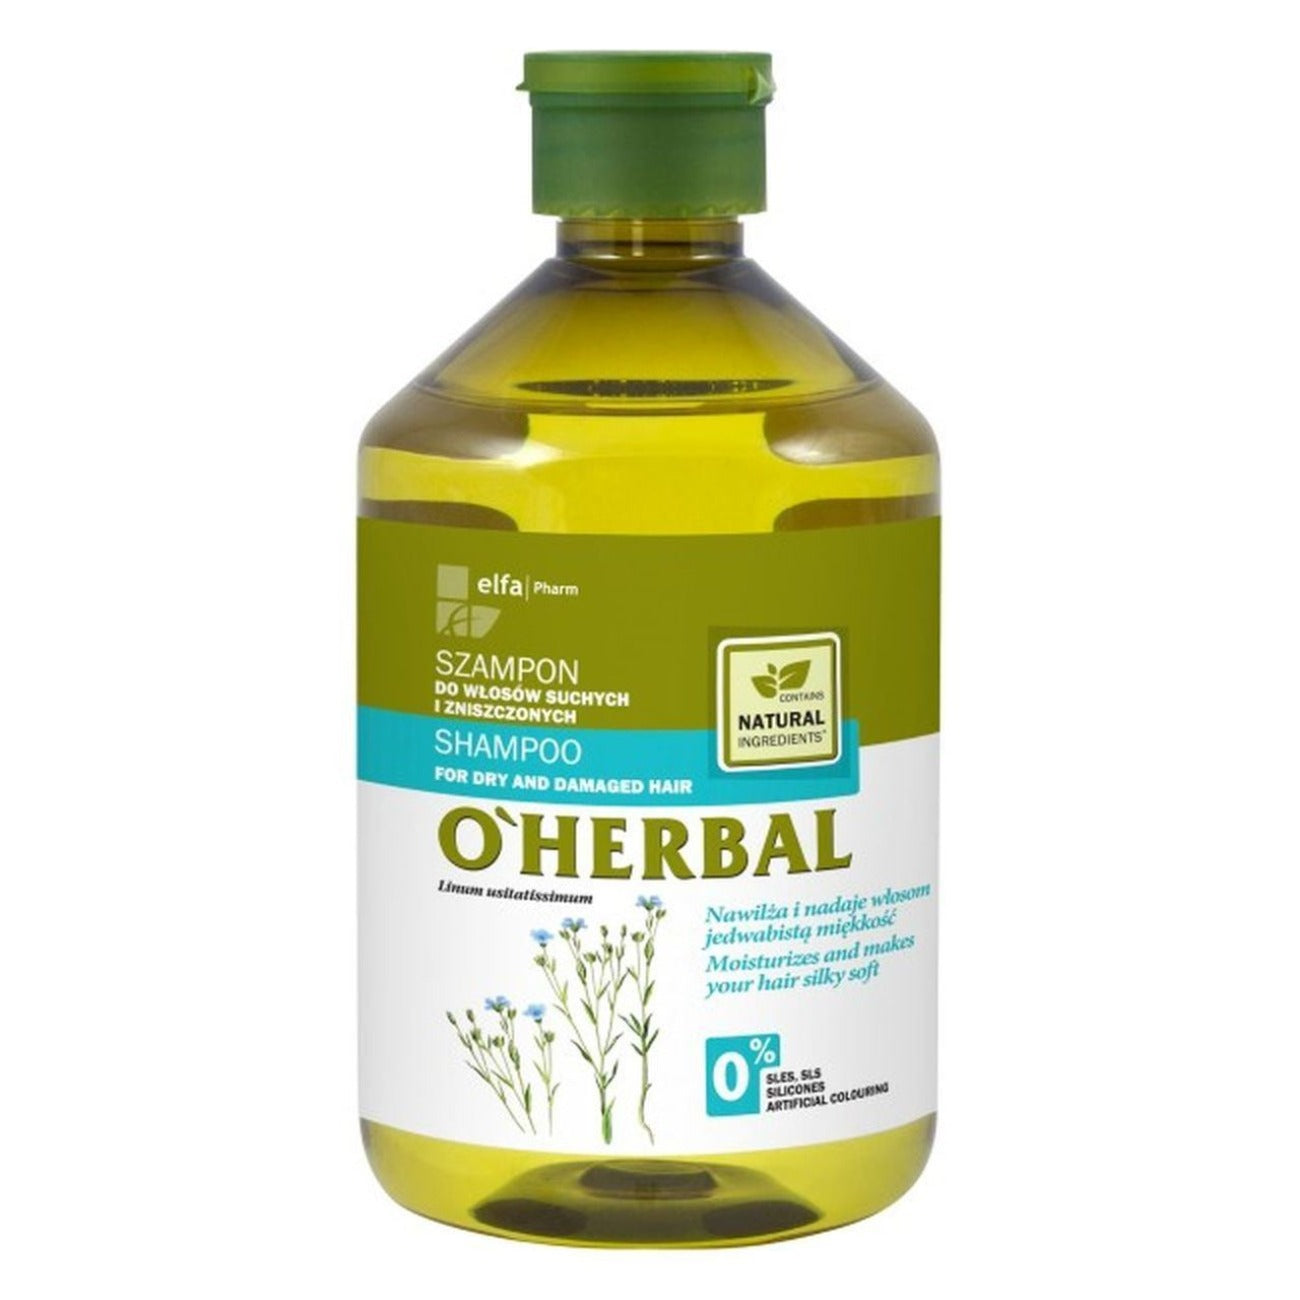 O'Herbal Shampoo For Dry & Damaged Hair with Flax Extract 500ml